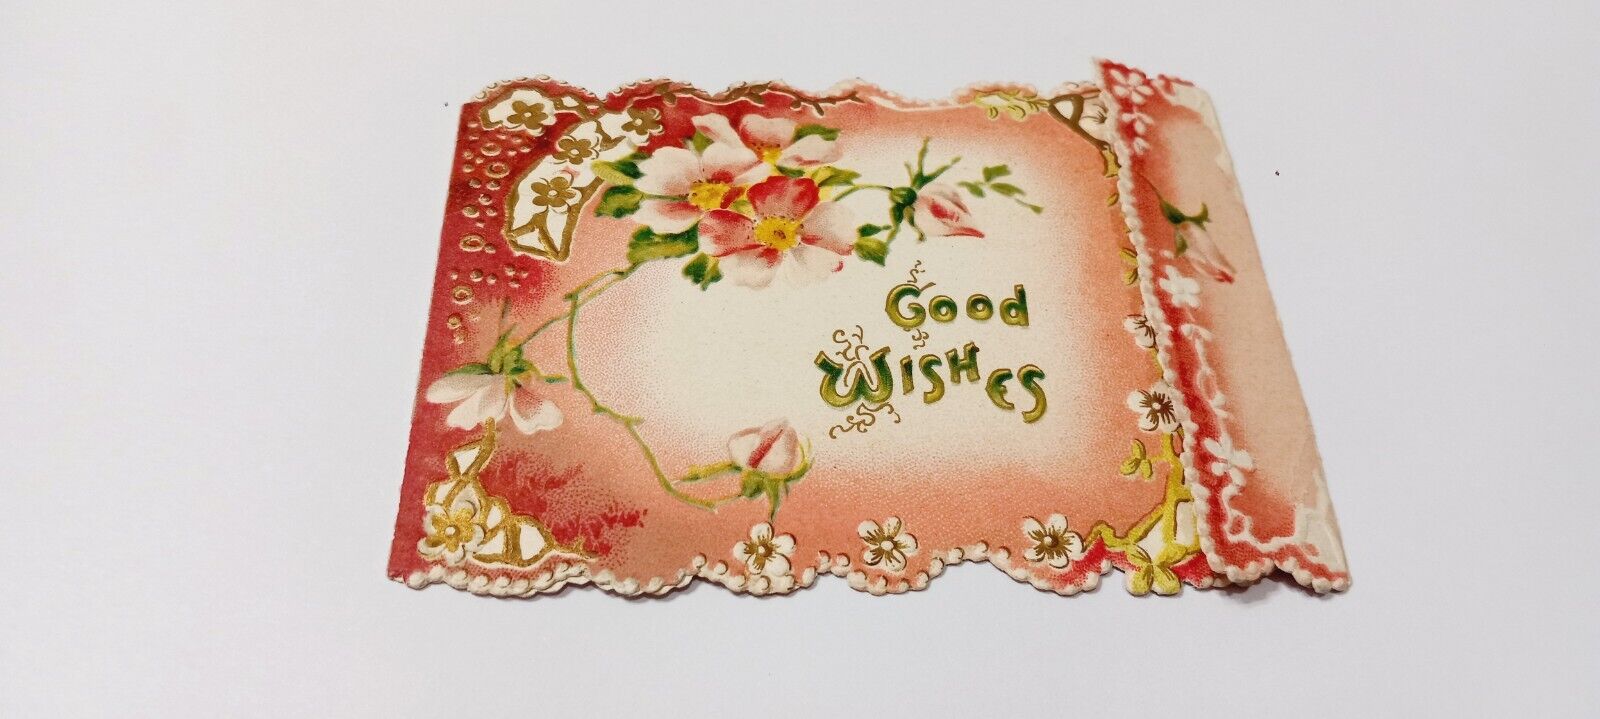 VICTORIAN ANTIQUE GREETING CARD CHRISTMAS GOOD WISH DIE CUT FLORAL FOLD OUT CARD